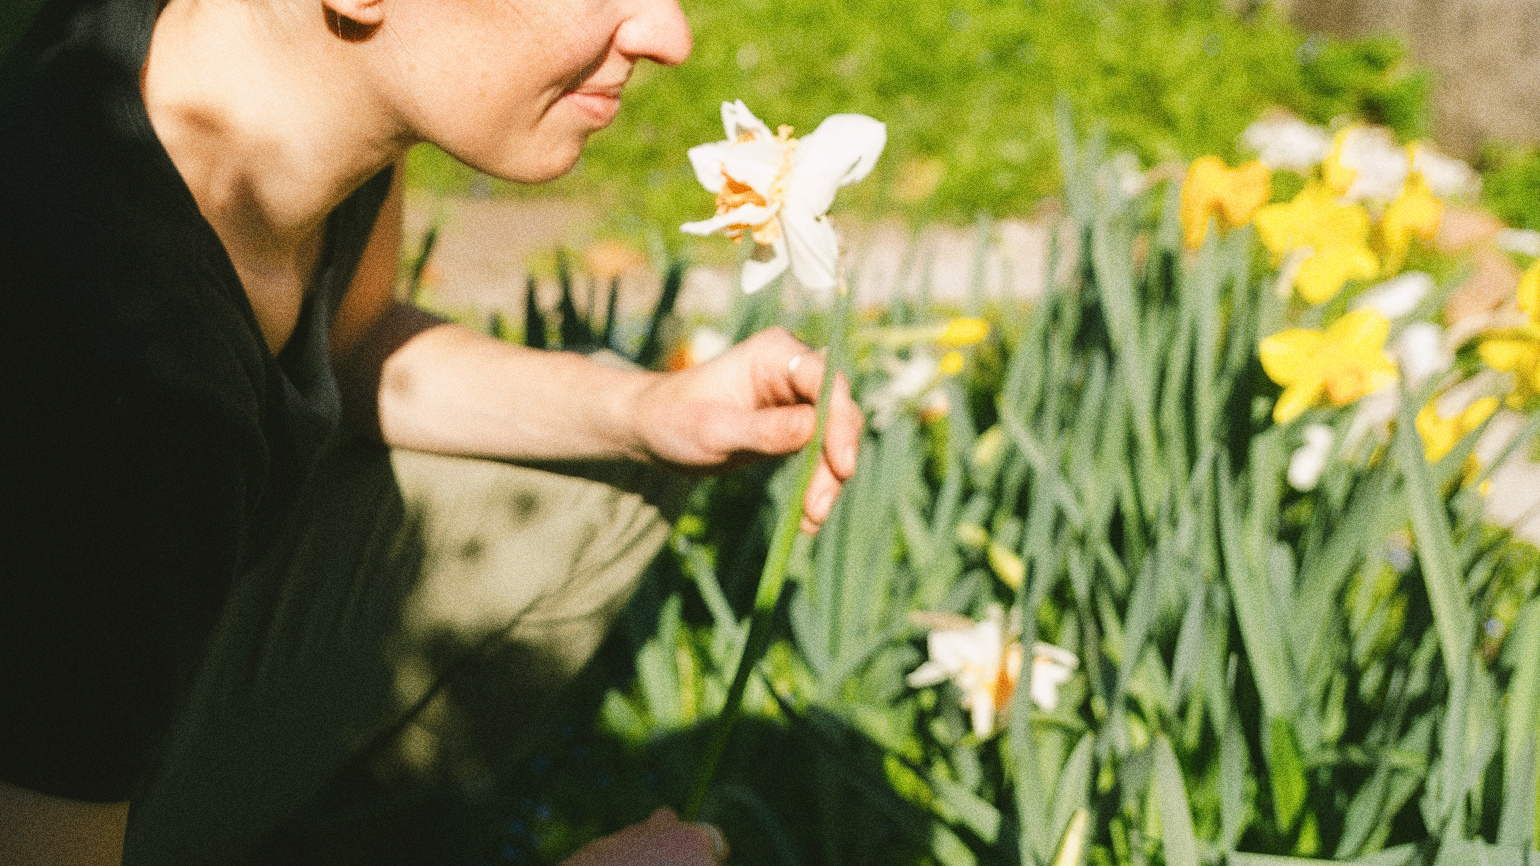 Woman smelling a daffodil while thinking about her new goals for gardening